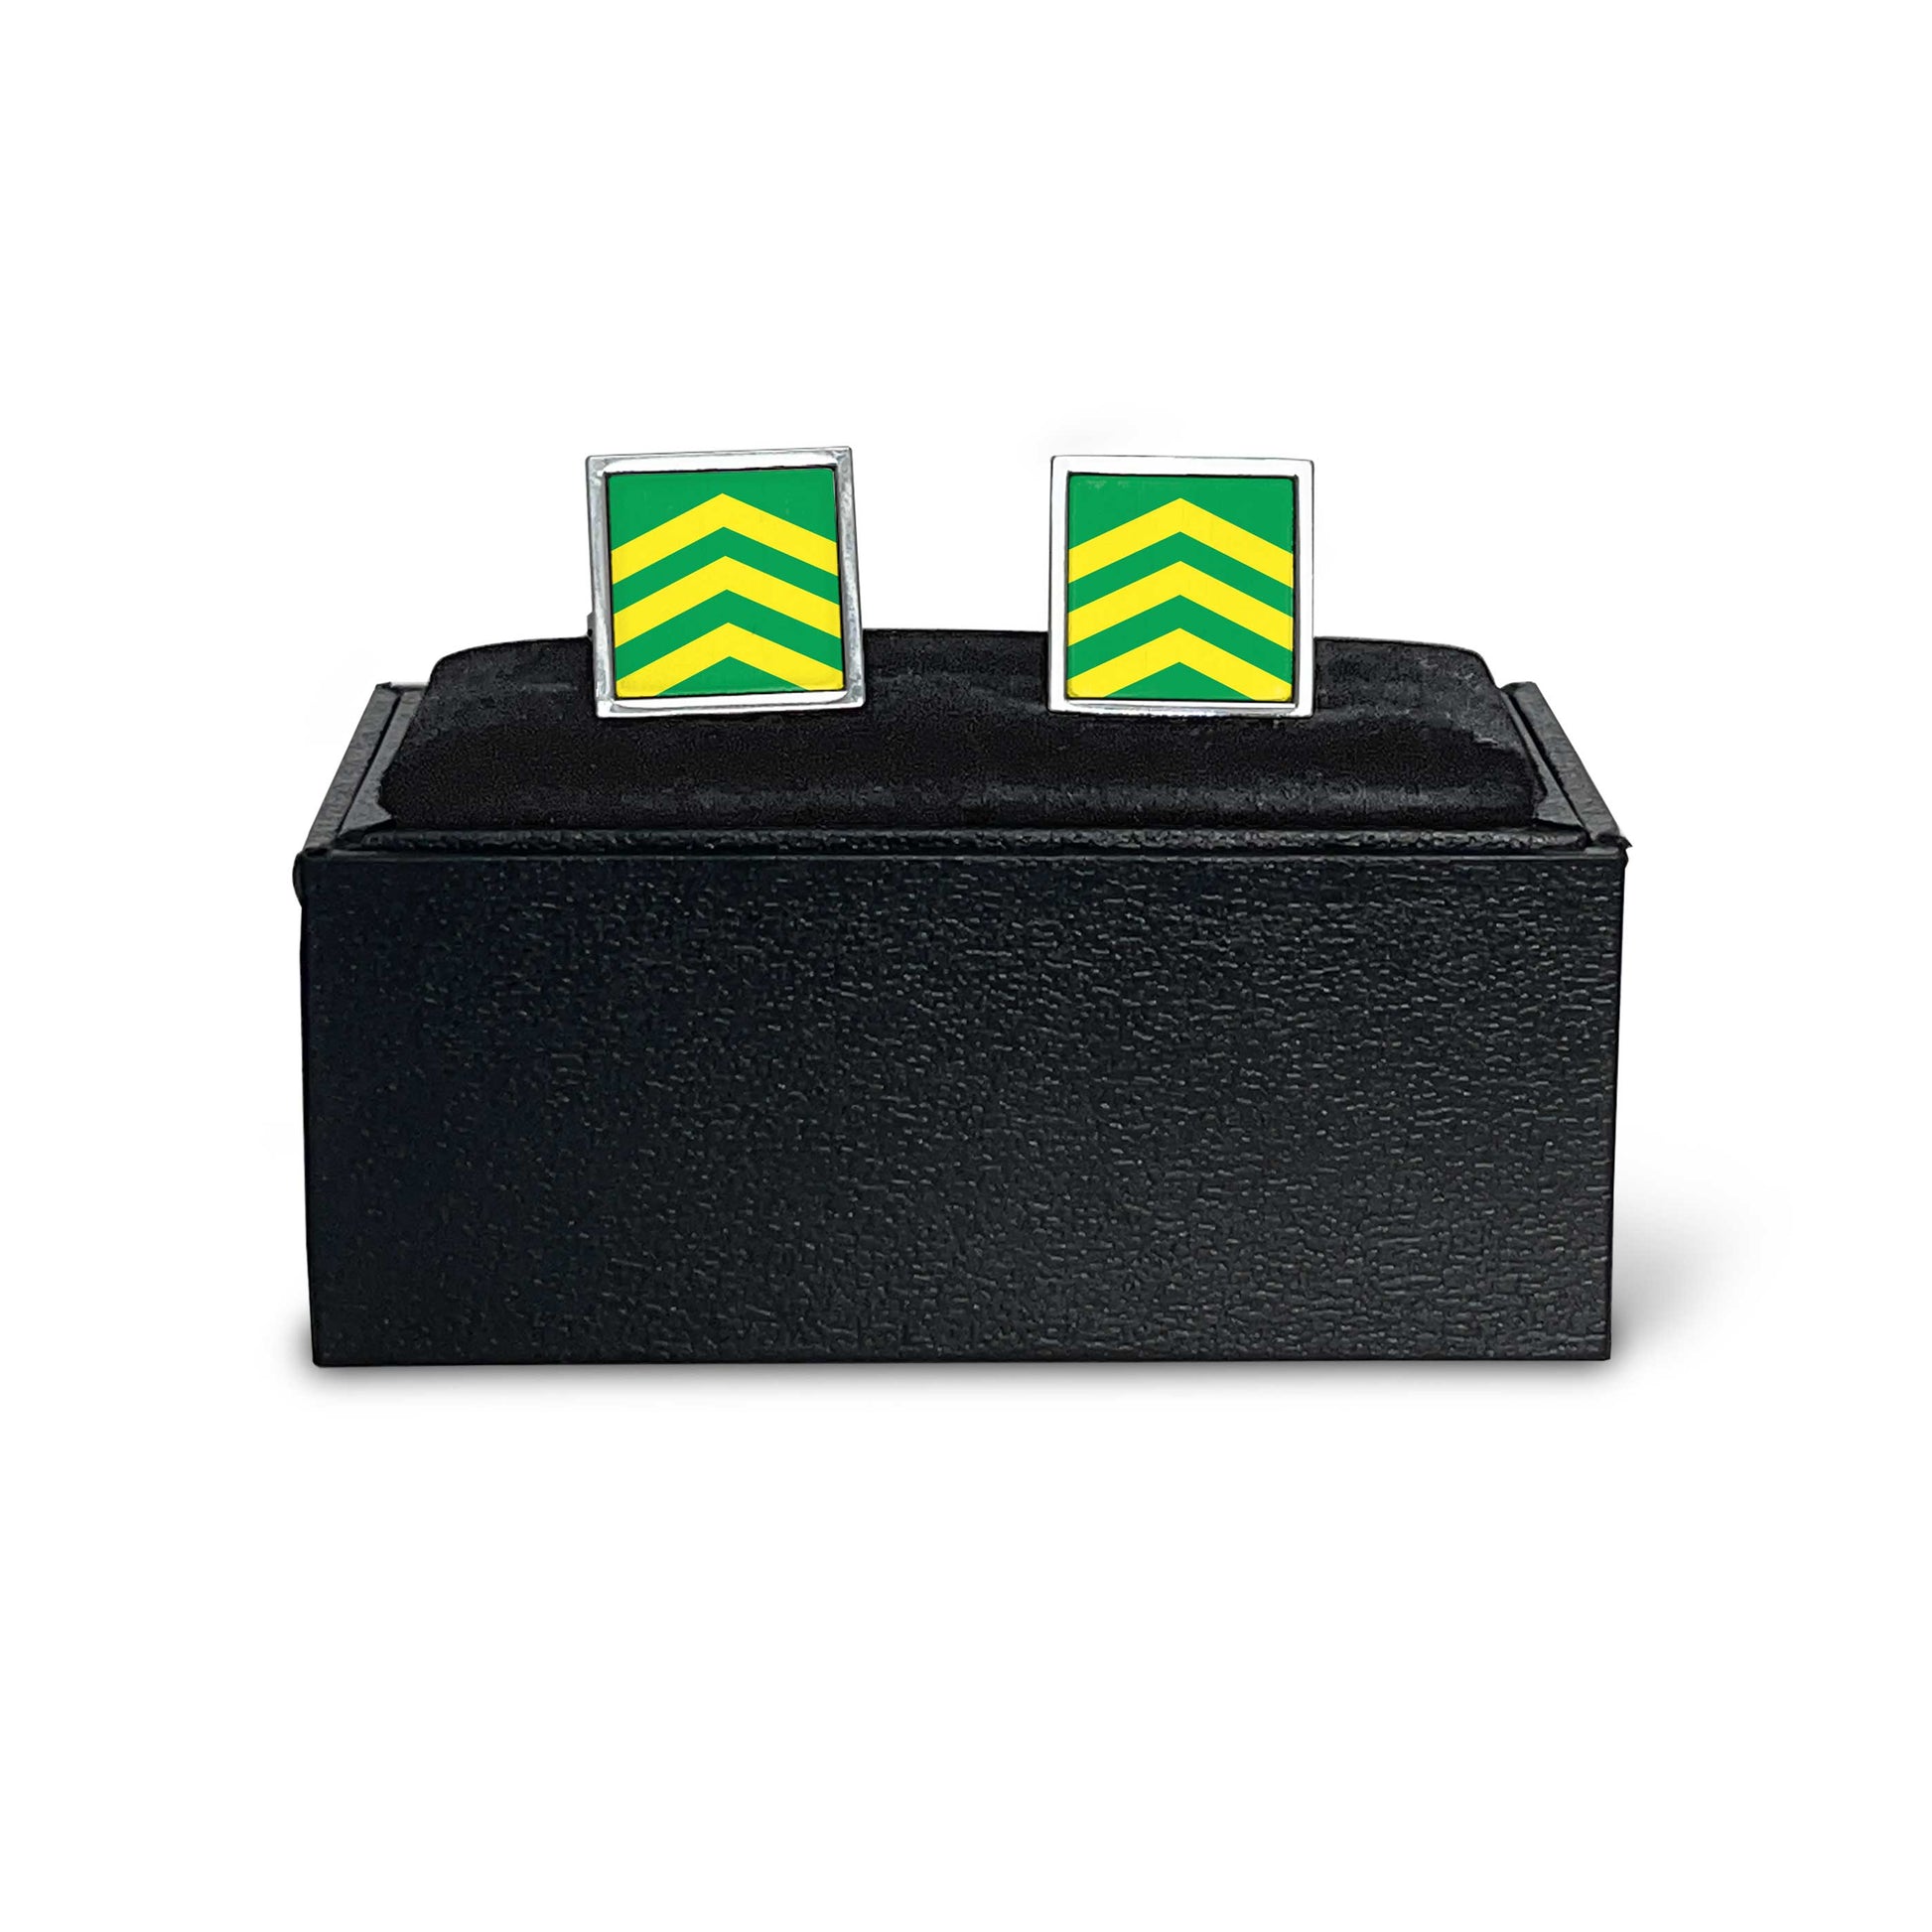 Watch This Space Syndicate Cufflinks - Cufflinks - Hacked Up